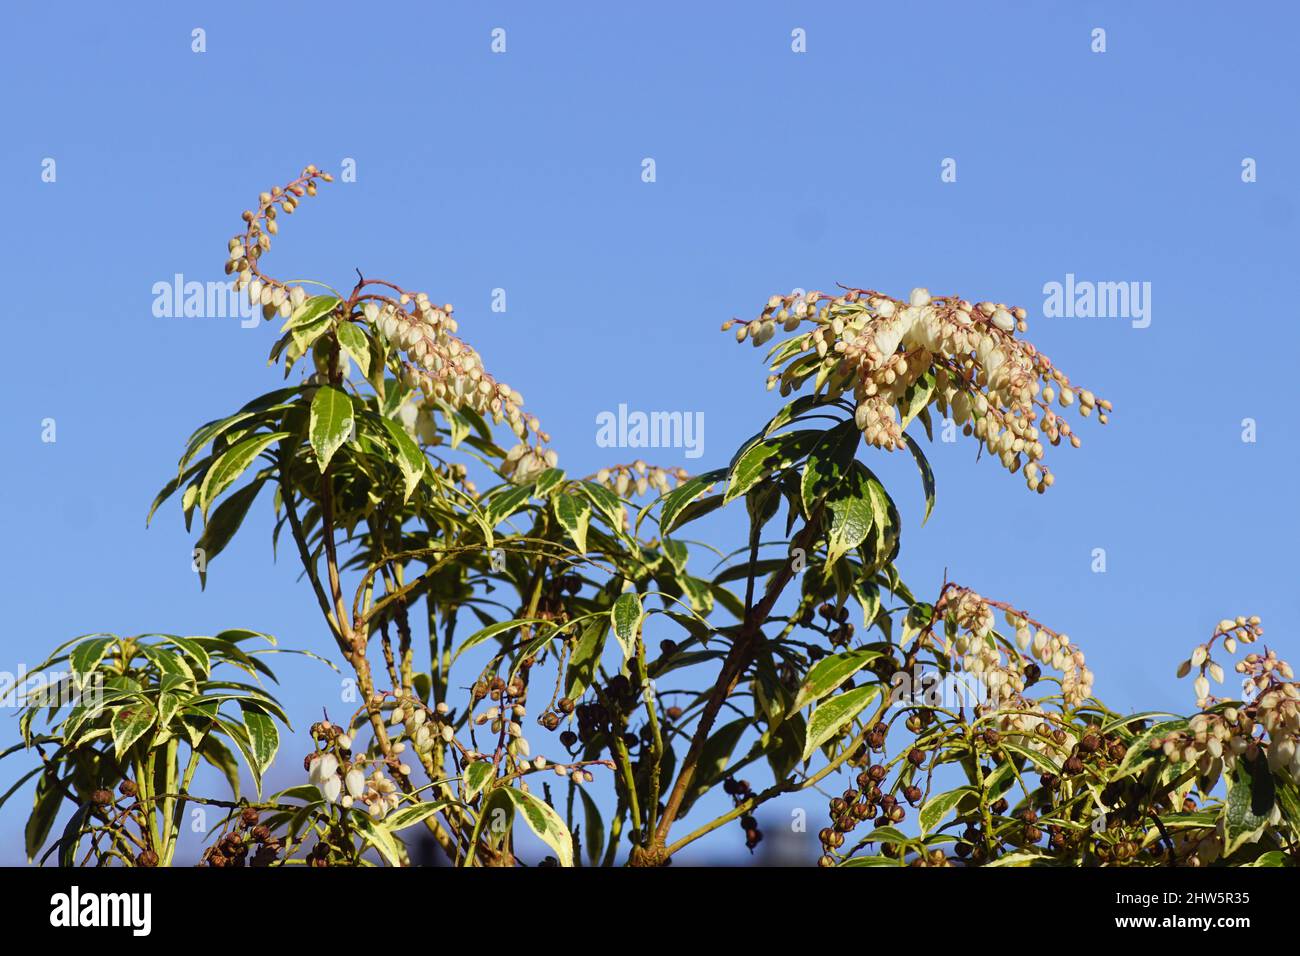 White flowers of Pieris (Pieris japonica variegata). Heath, heather family (Ericaceae). Flowering in the end of the winter. Blue sky, Netherlands, Stock Photo